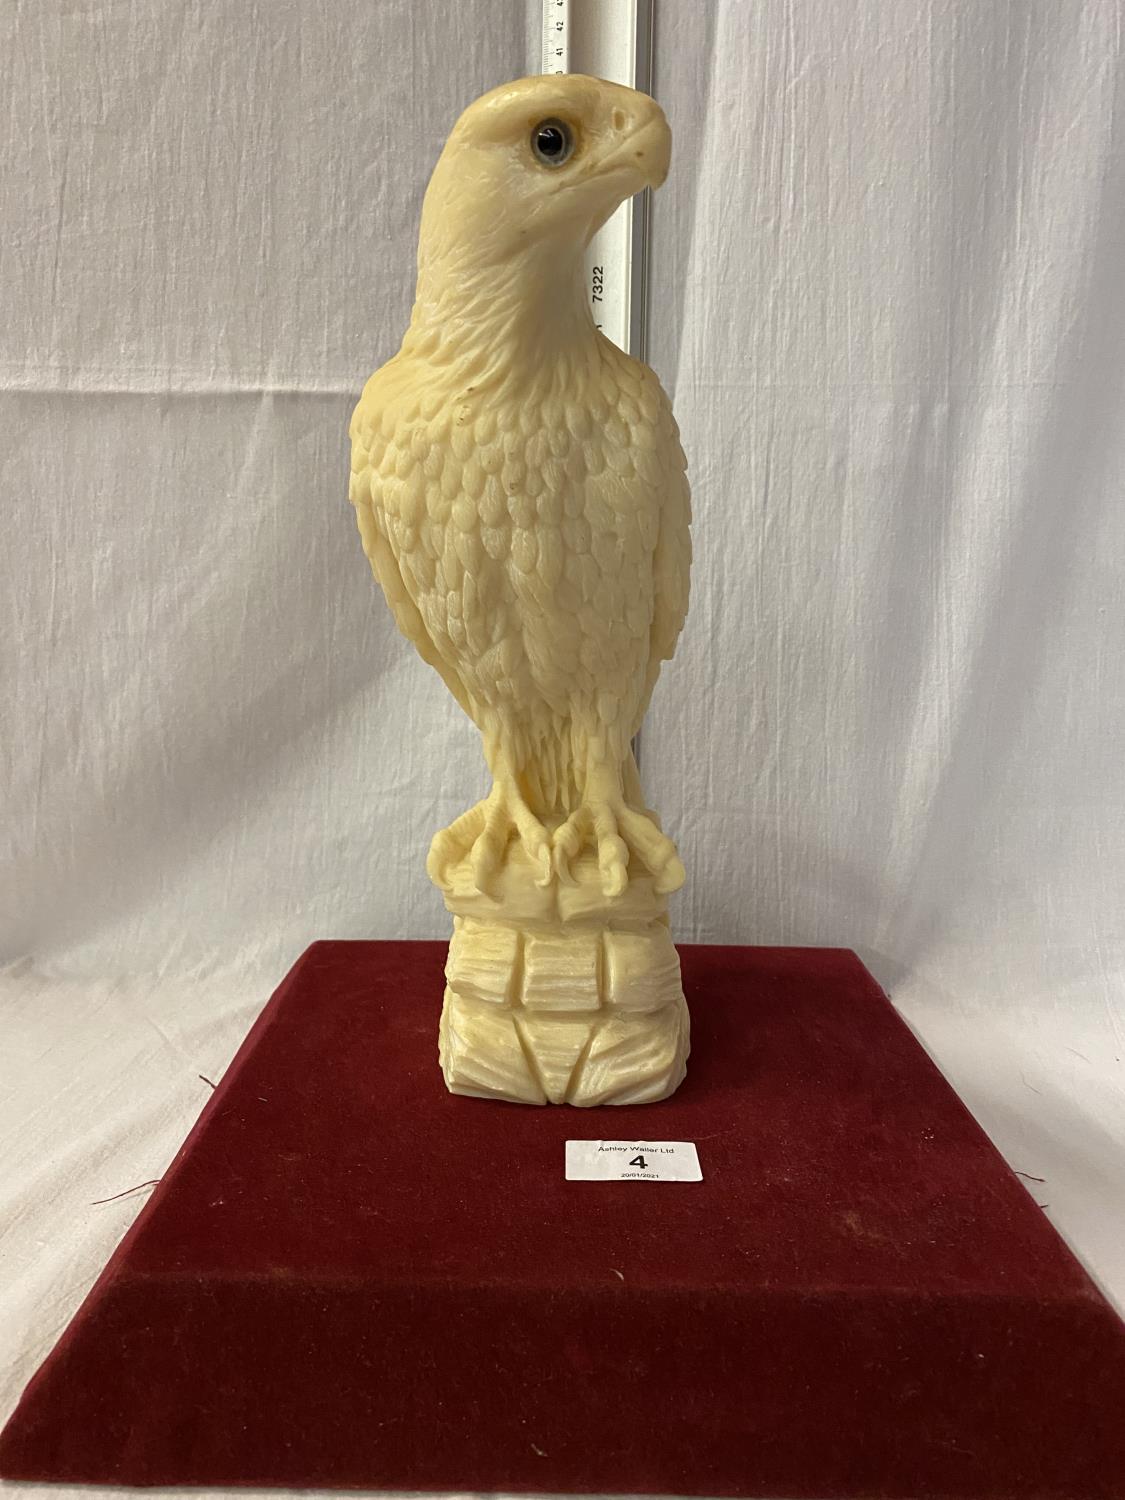 A RESIN FIGURE OF A BIRD OF PREY - HEIGHT 28CMS - Image 2 of 3